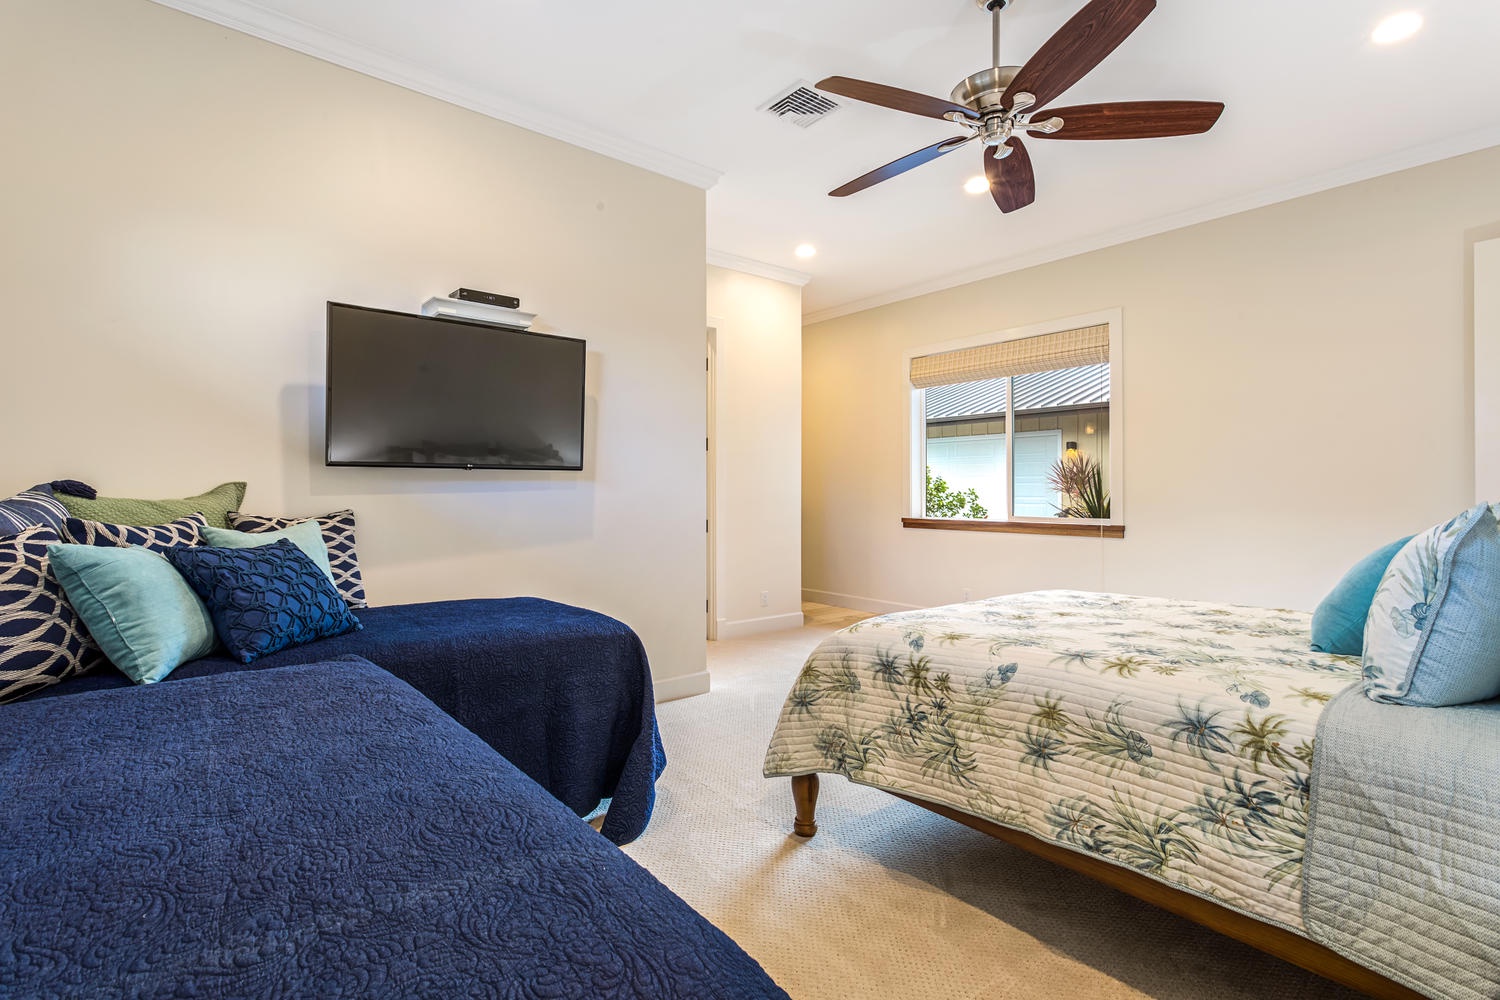 Kailua Kona Vacation Rentals, Ohana le'ale'a - This room features a queen bed, 2 twin beds, a small office nook, and a large en suite